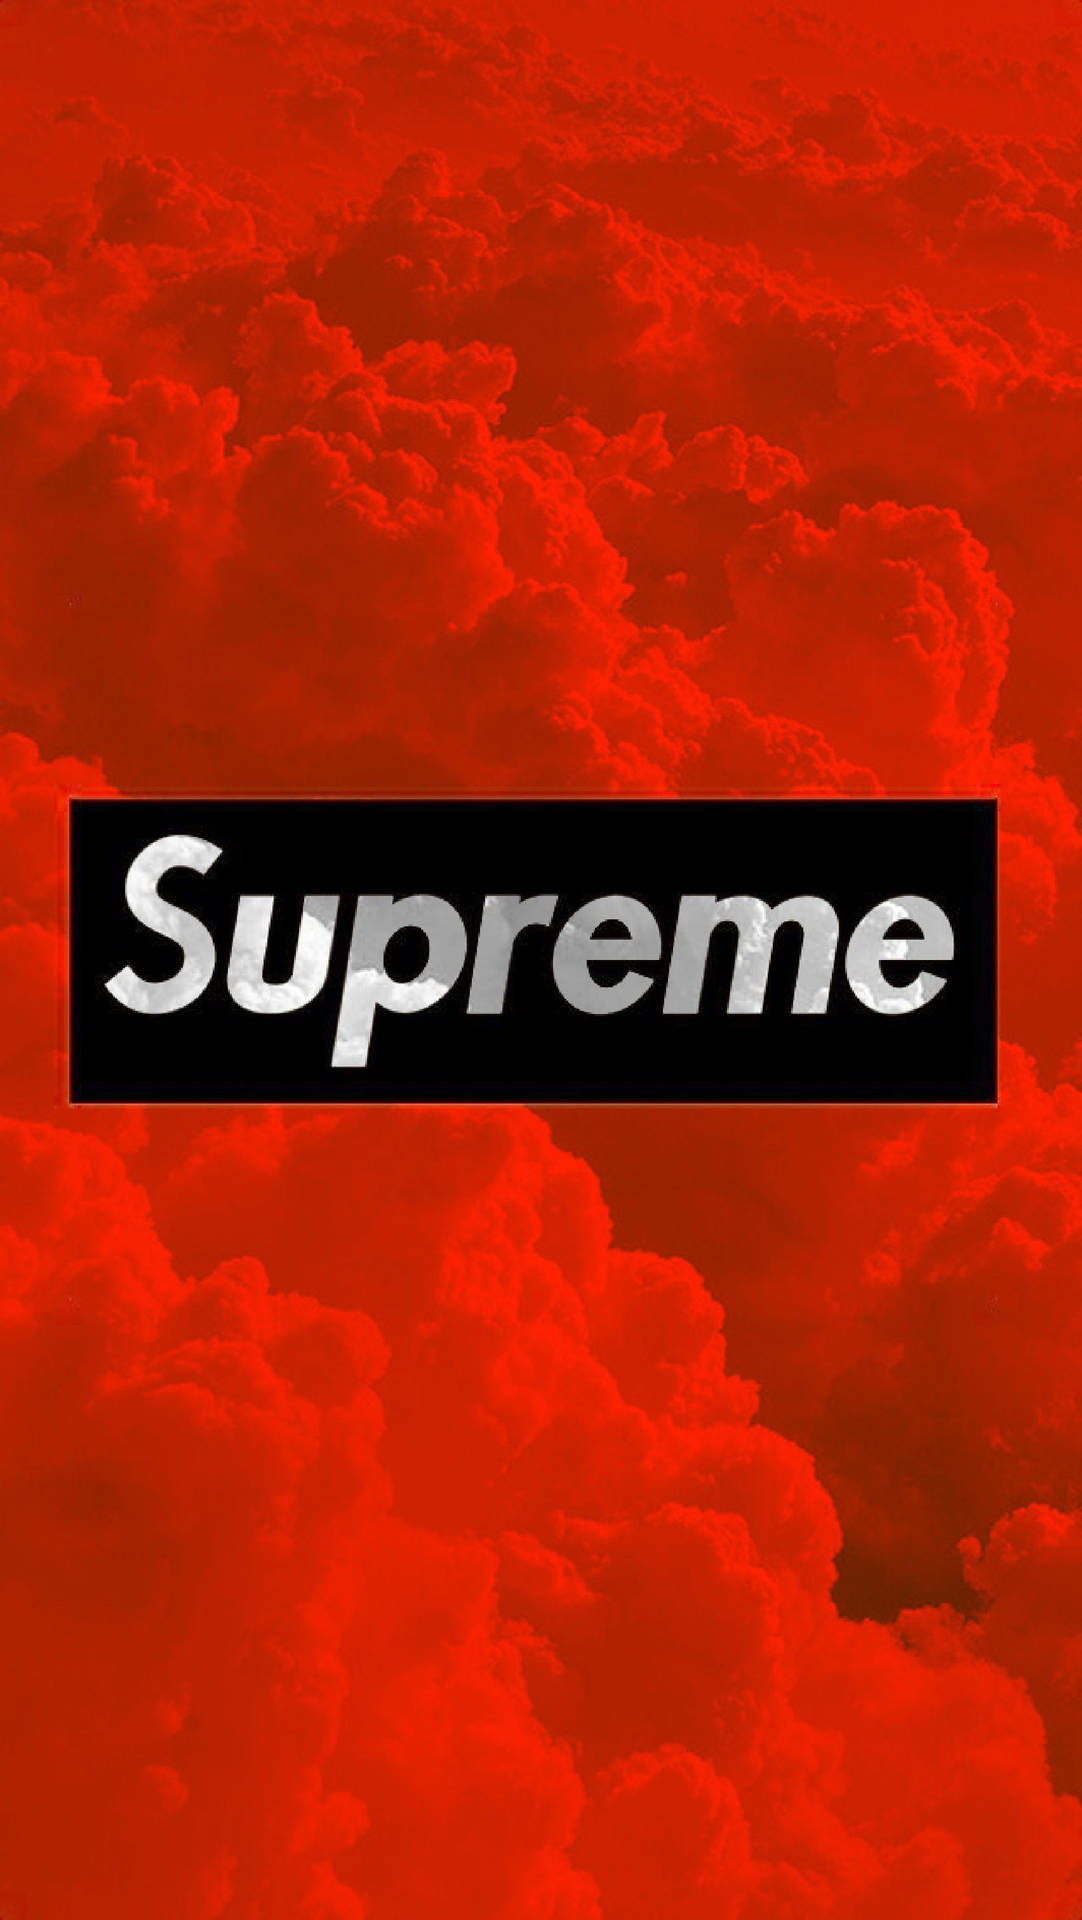 Download Red Supreme Logo And Clouds Wallpaper